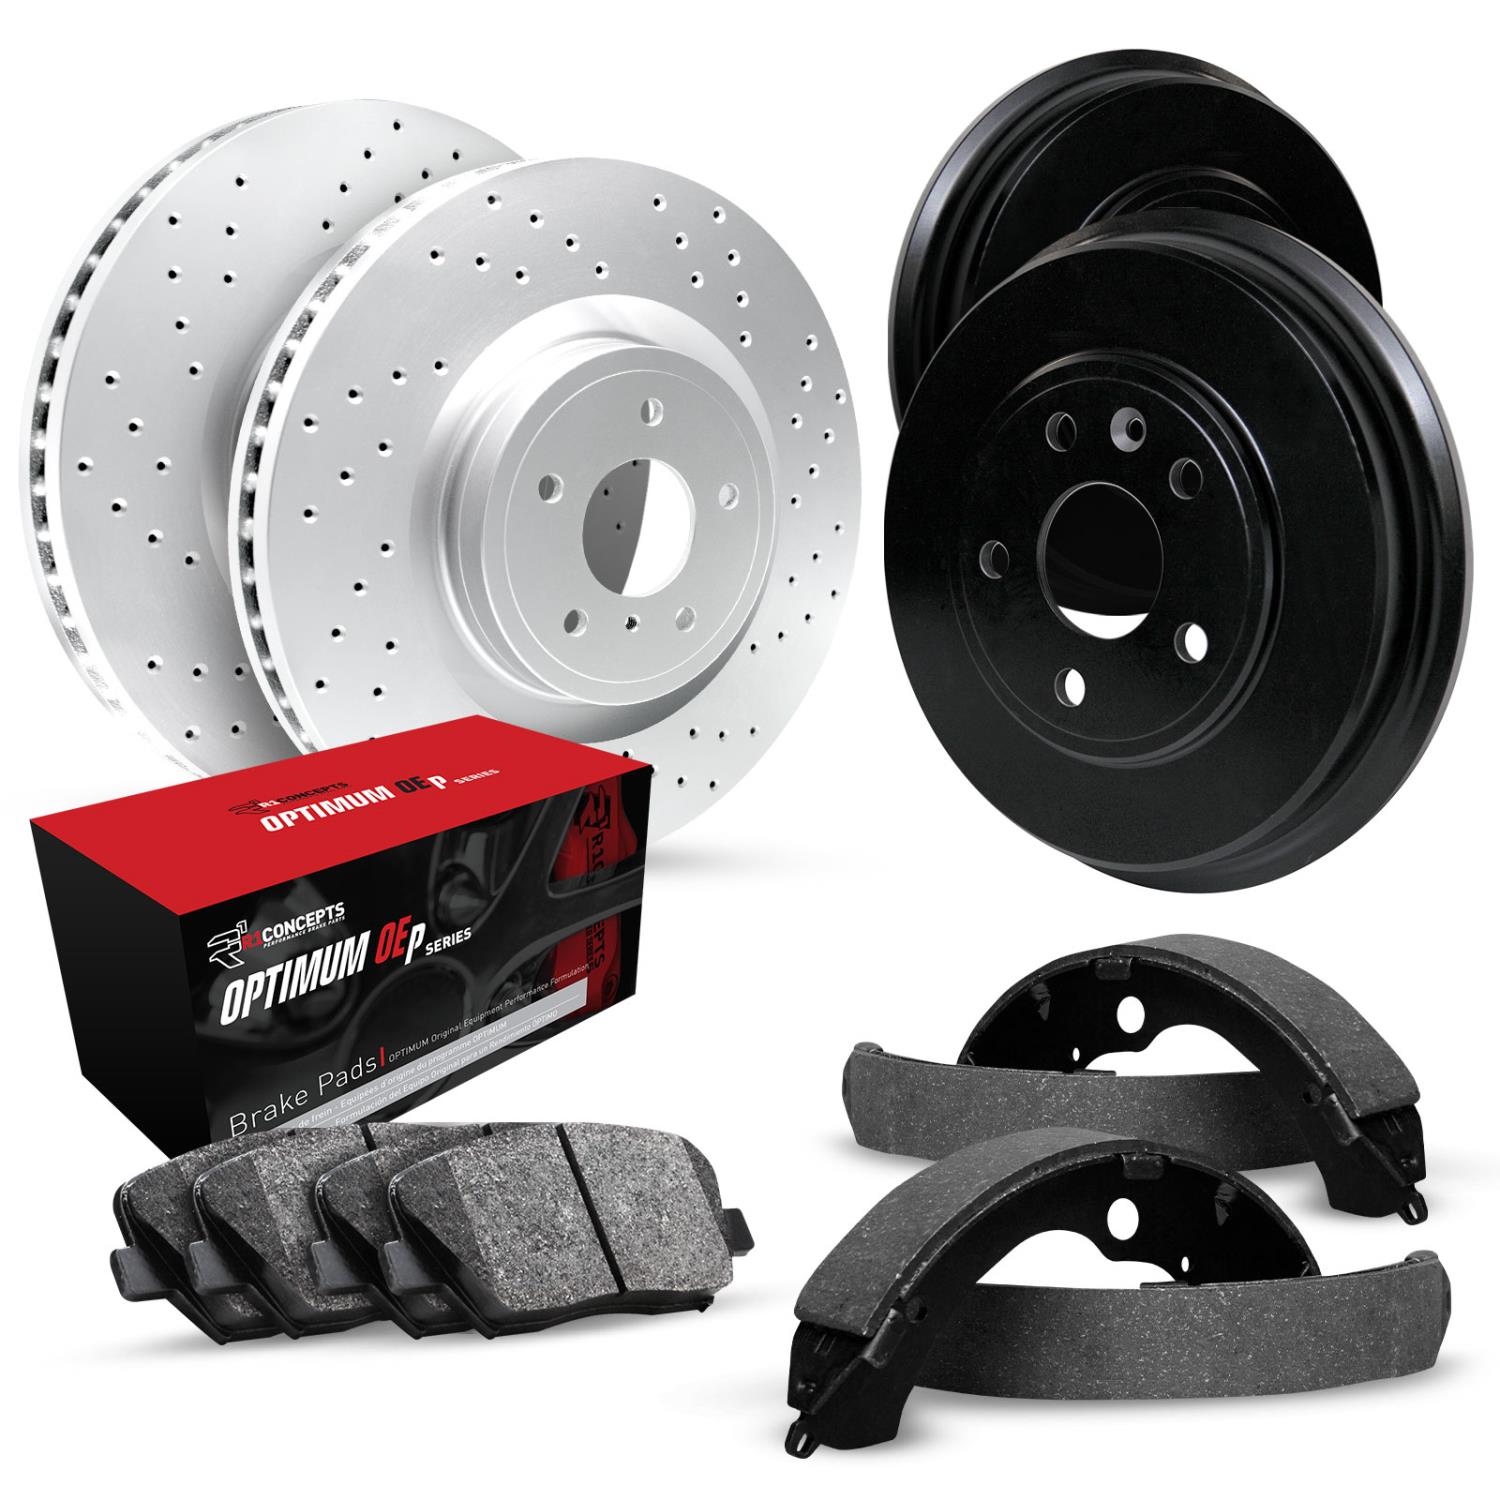 GEO-Carbon Drilled Brake Rotor & Drum Set w/Optimum OE Pads & Shoes, 1983-1992 GM, Position: Front & Rear